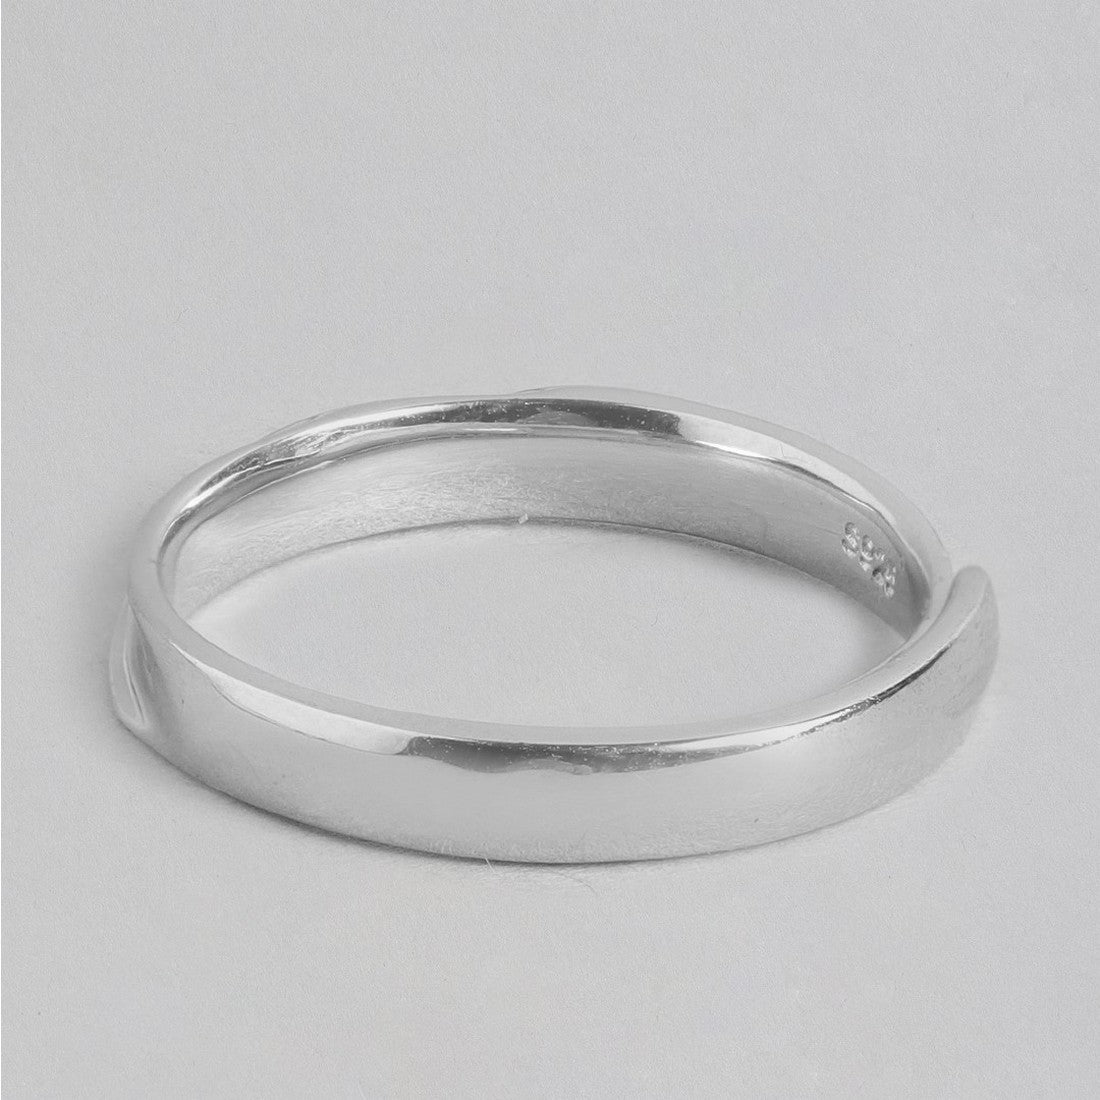 Minimalistic CZ 925 Sterling Silver Ring For Him (Adjustable)